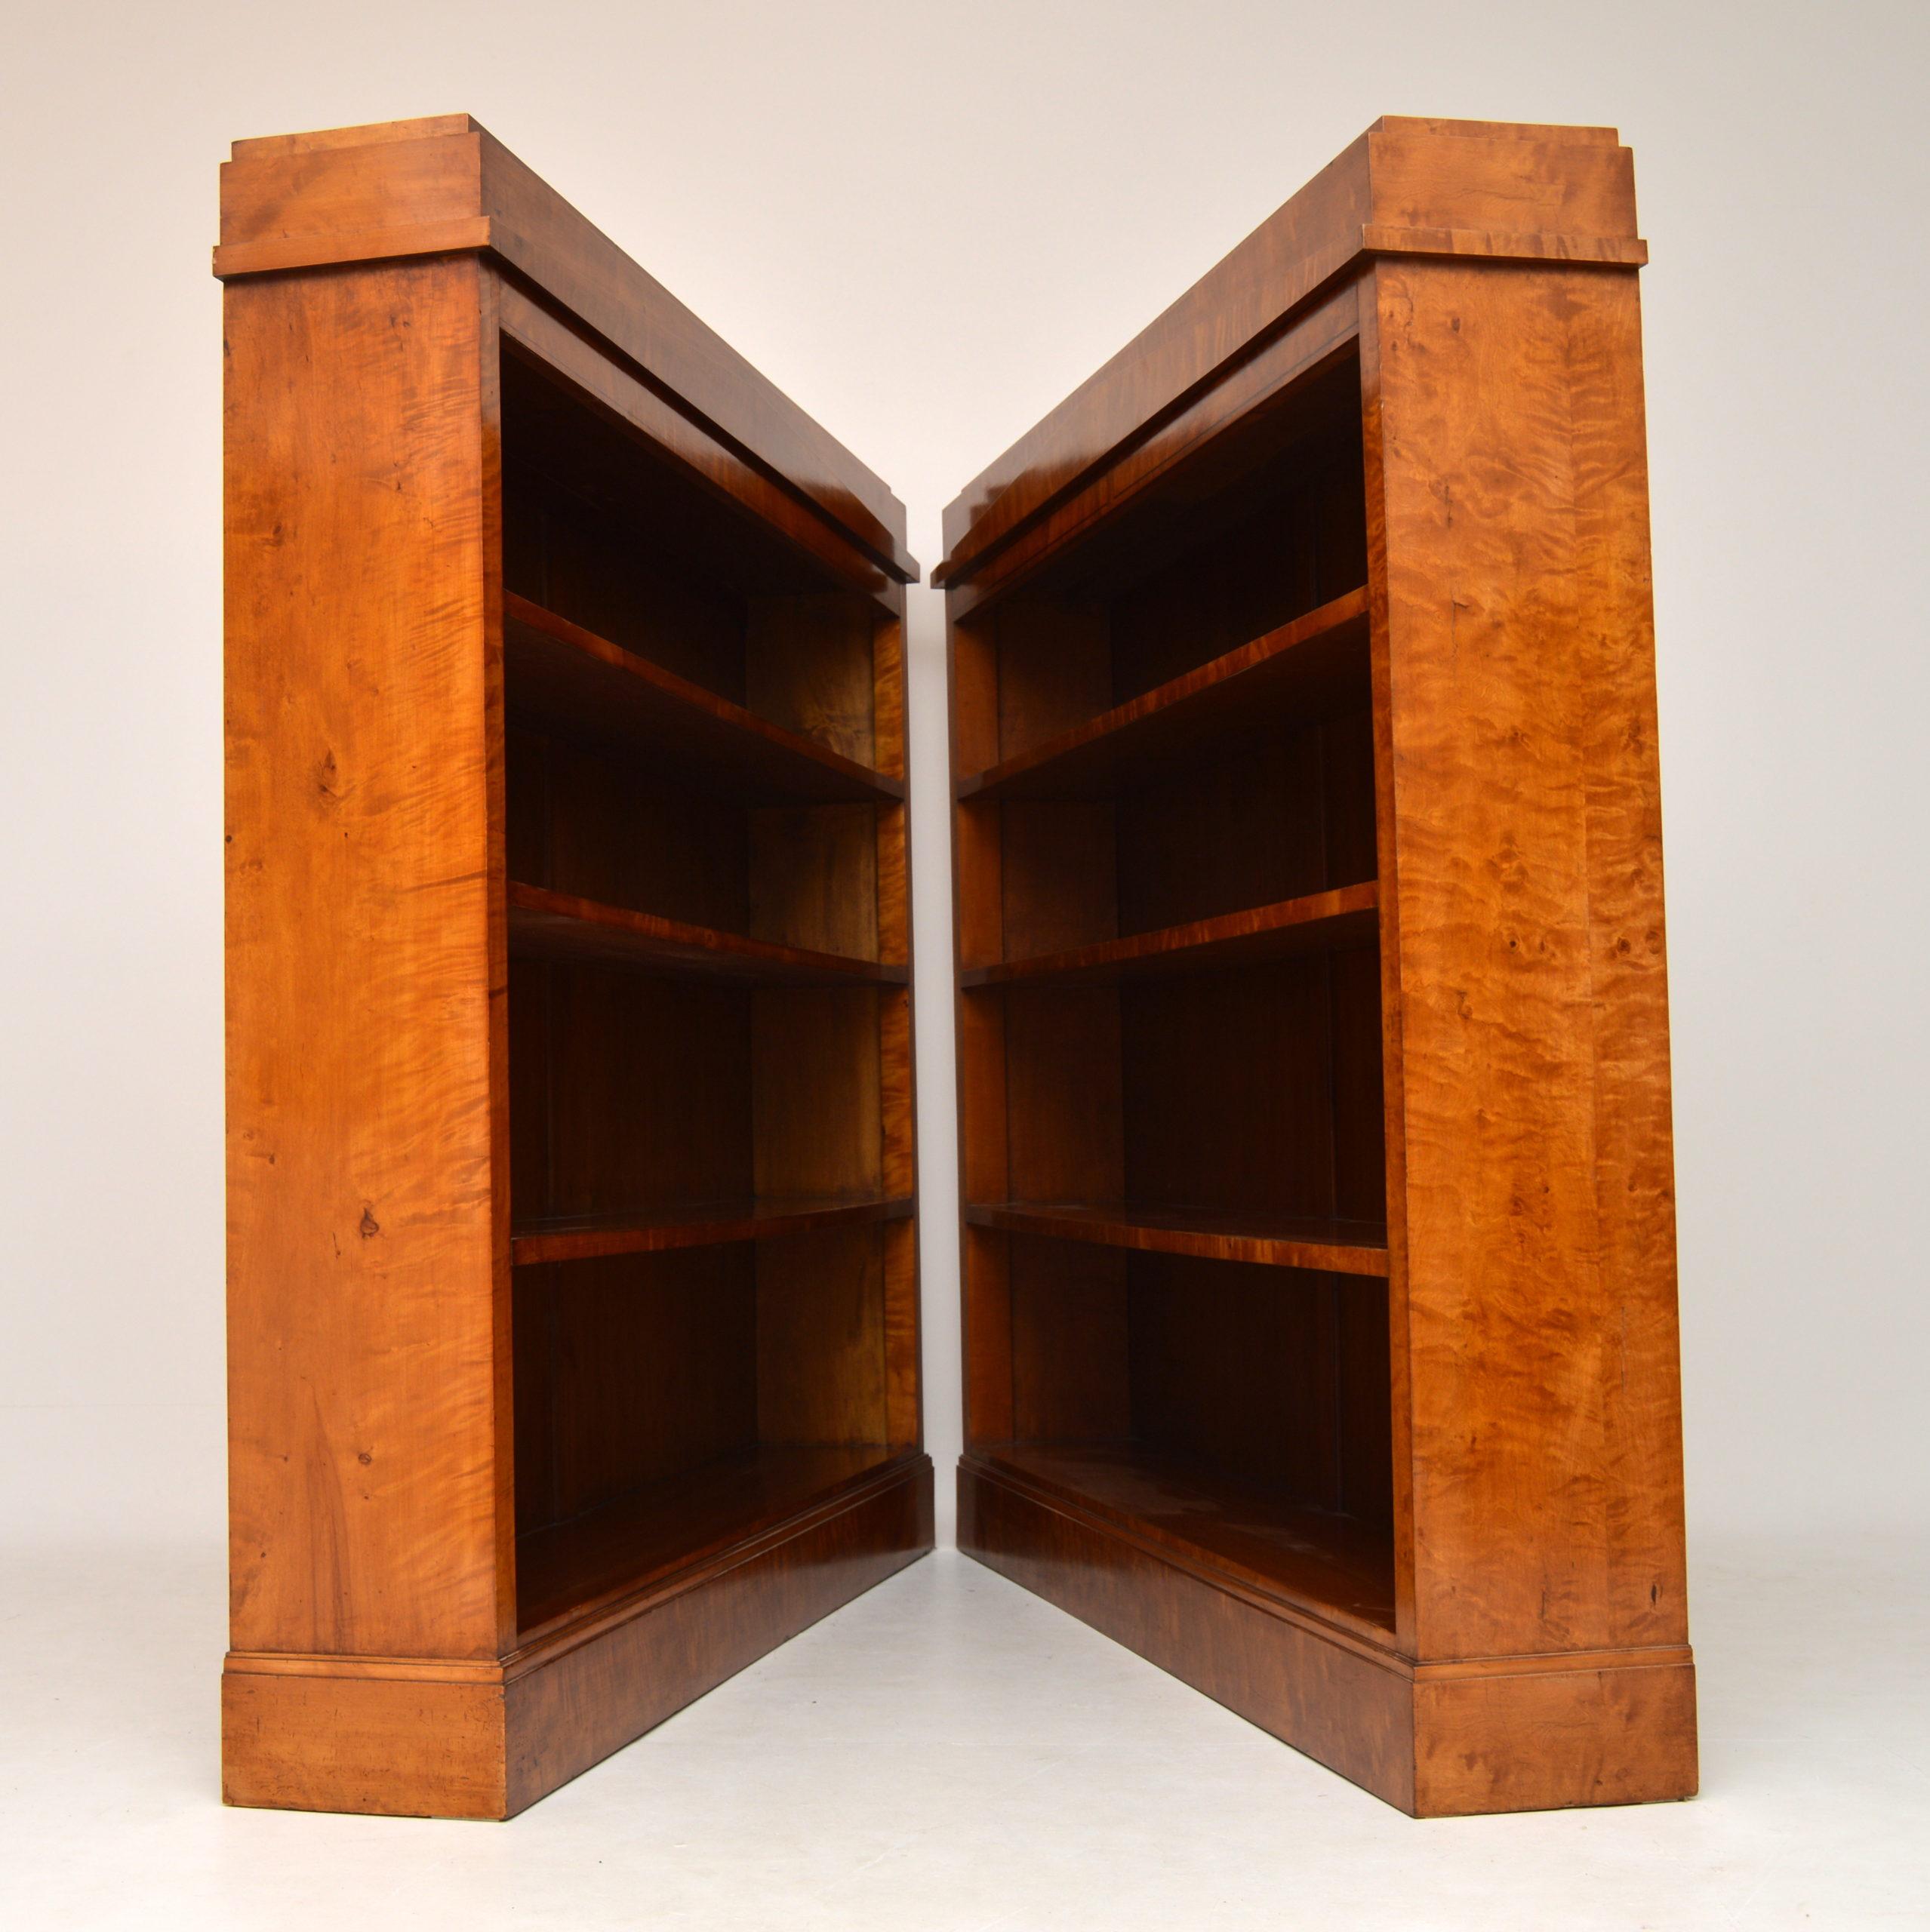 Impressive and rare pair of Swedish Biedermeier satin birch open bookcases in excellent original condition and dating from the late 19th century. I don’t really want to split them up, because it’s so hard to find a pair. Please enlarge all the